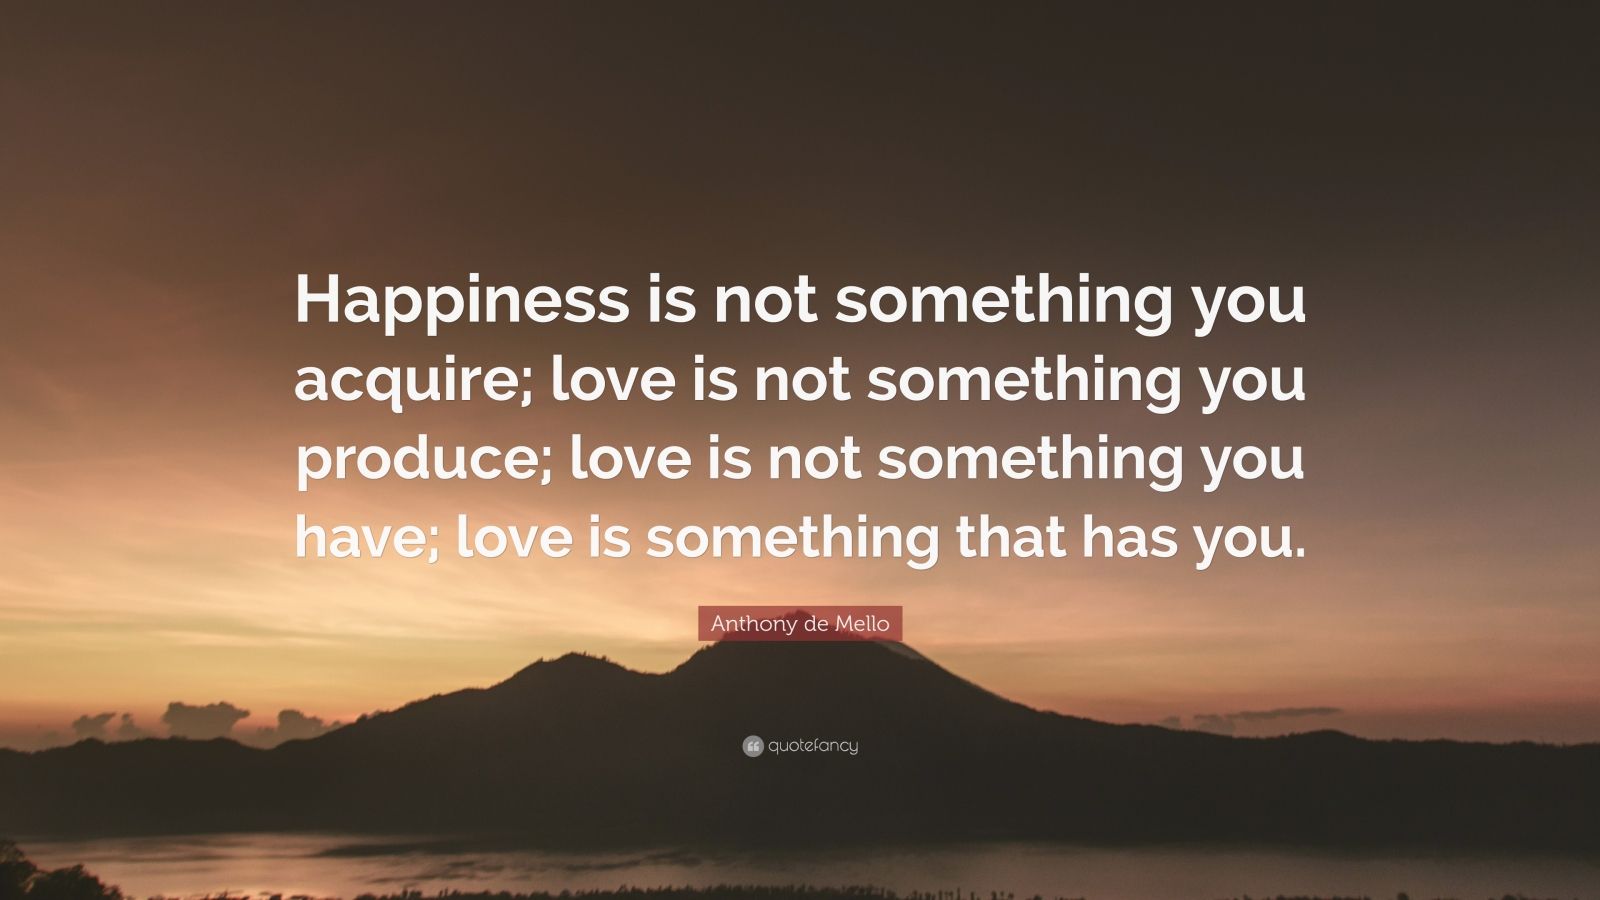 Anthony de Mello Quote: “Happiness is not something you acquire; love ...